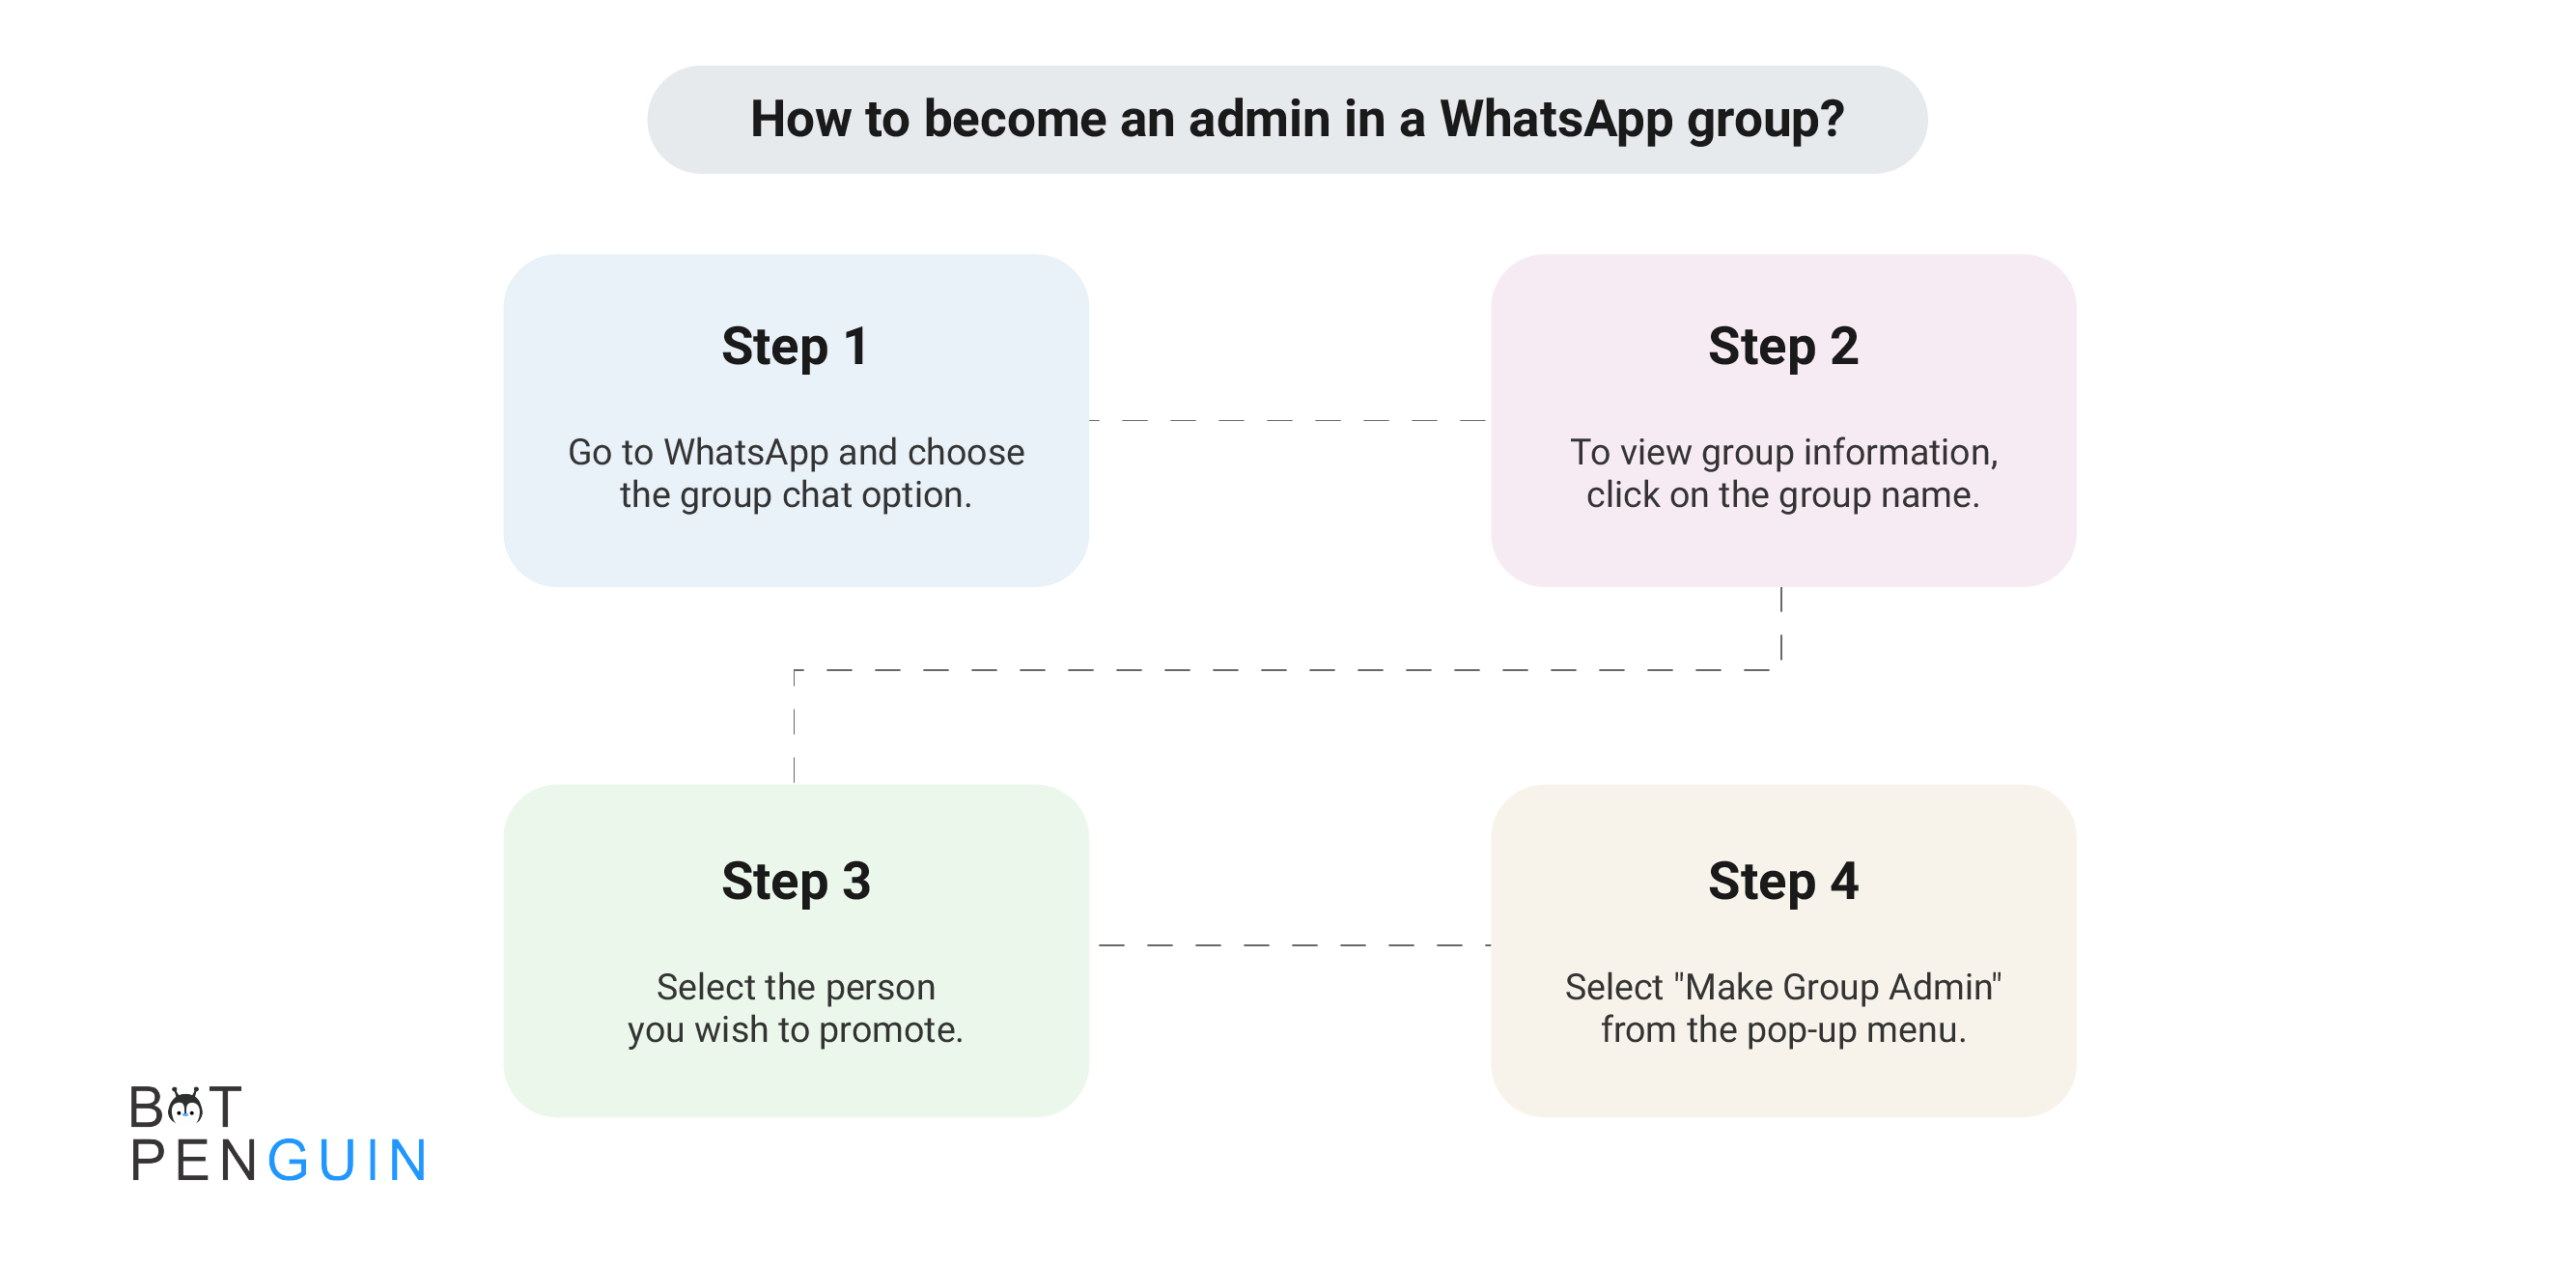 How to become an admin in a WhatsApp group?